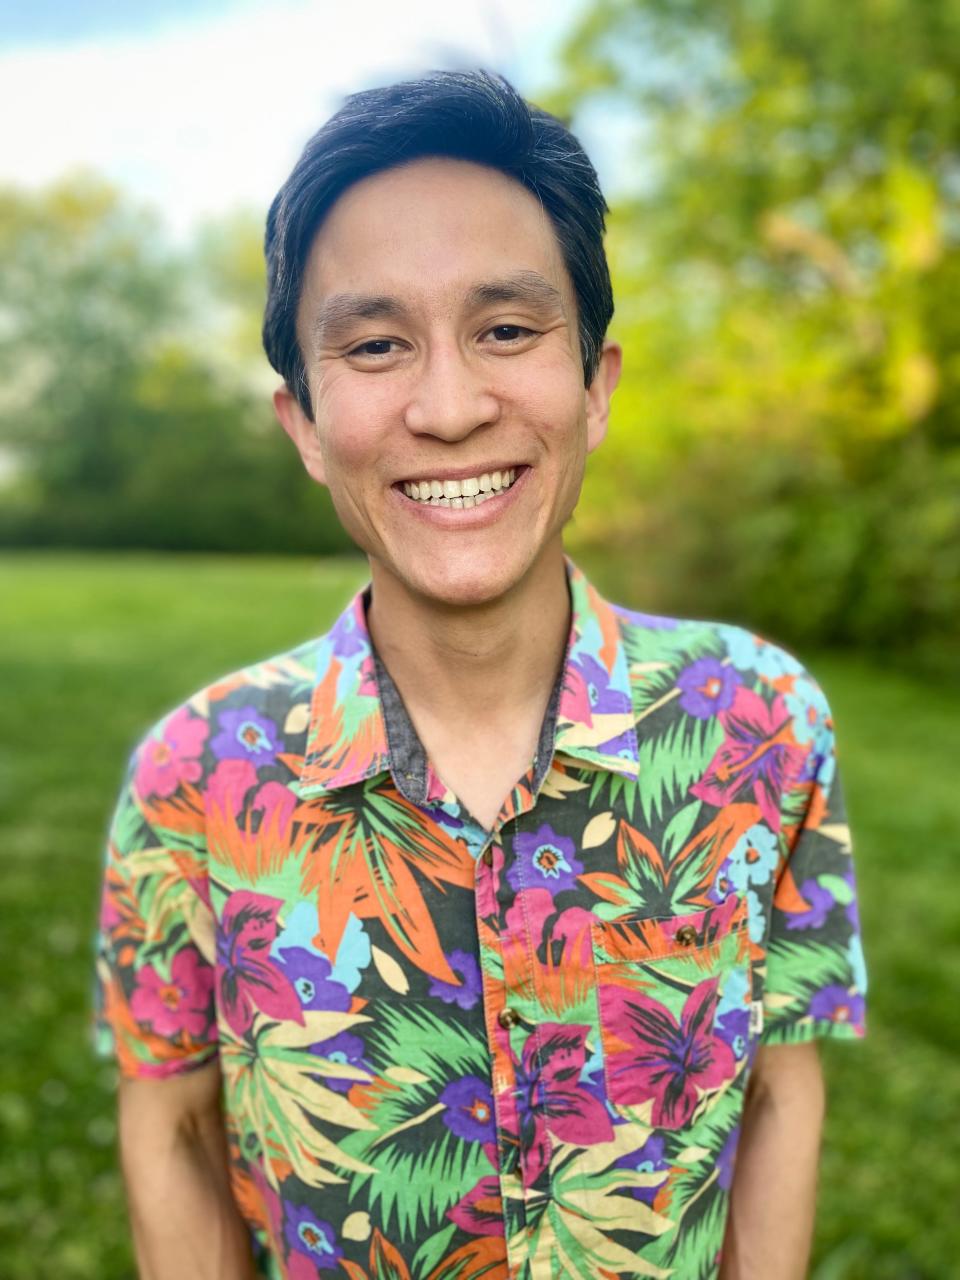 Chris Cheng, candidate for Metro Council At-Large seat in the 2023 Nashville-Davidson County election